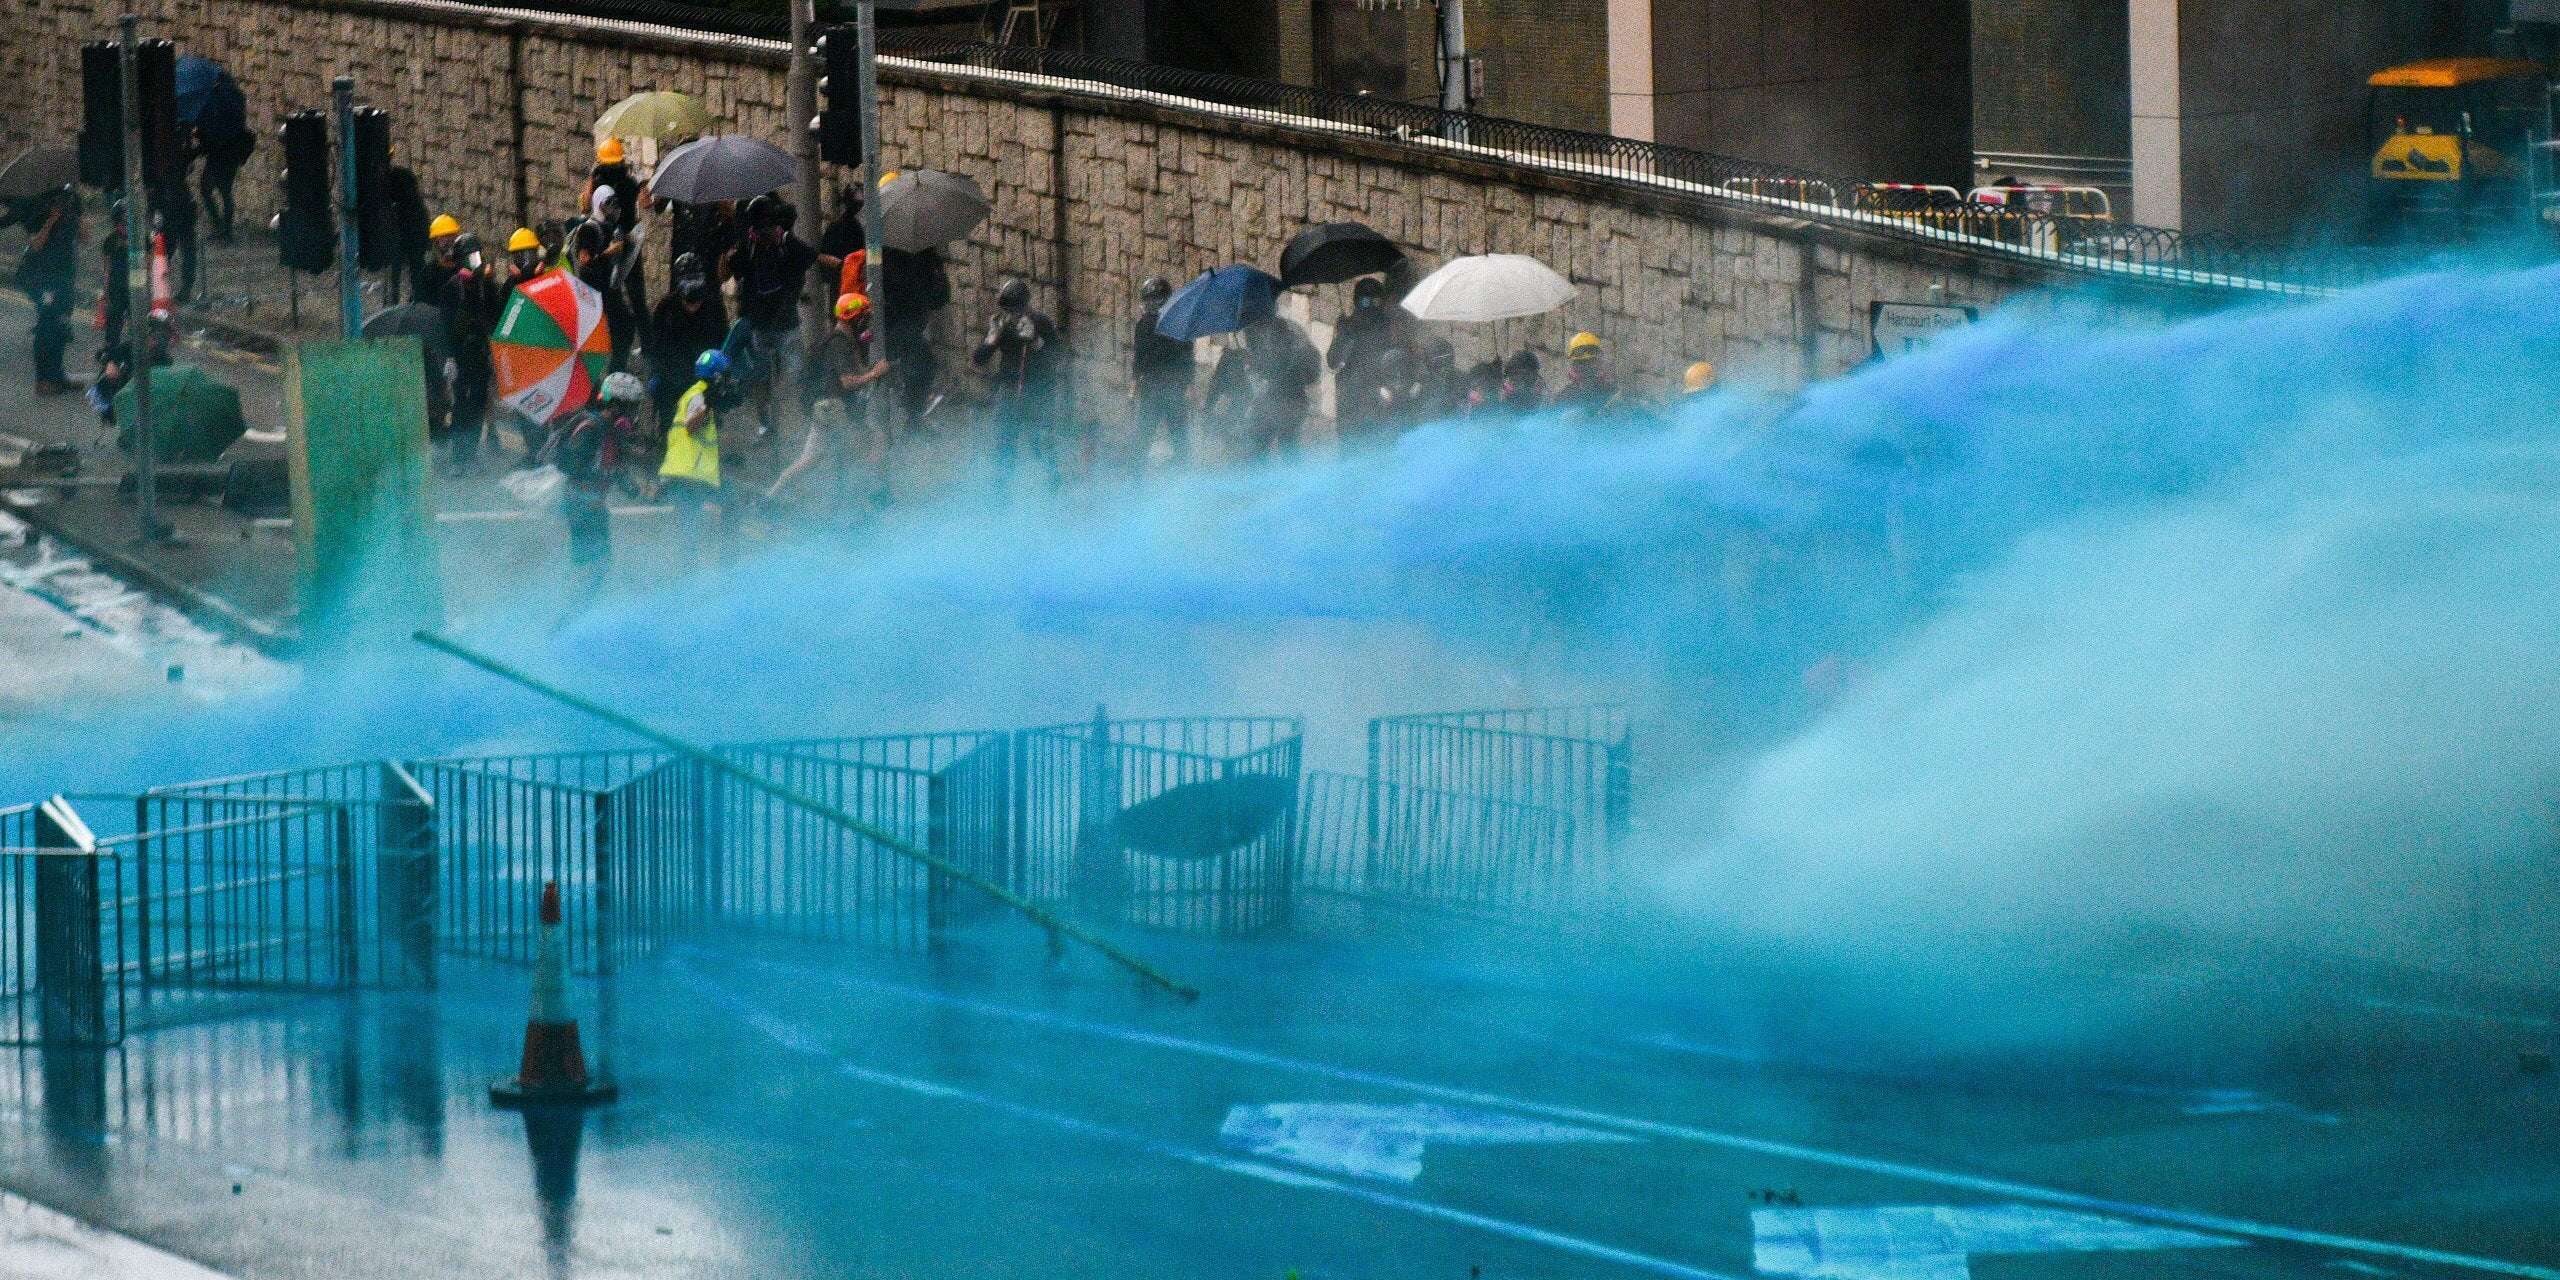 image for Hong Kong police are spraying protesters with blue-dye water cannons to mark them for arrest later